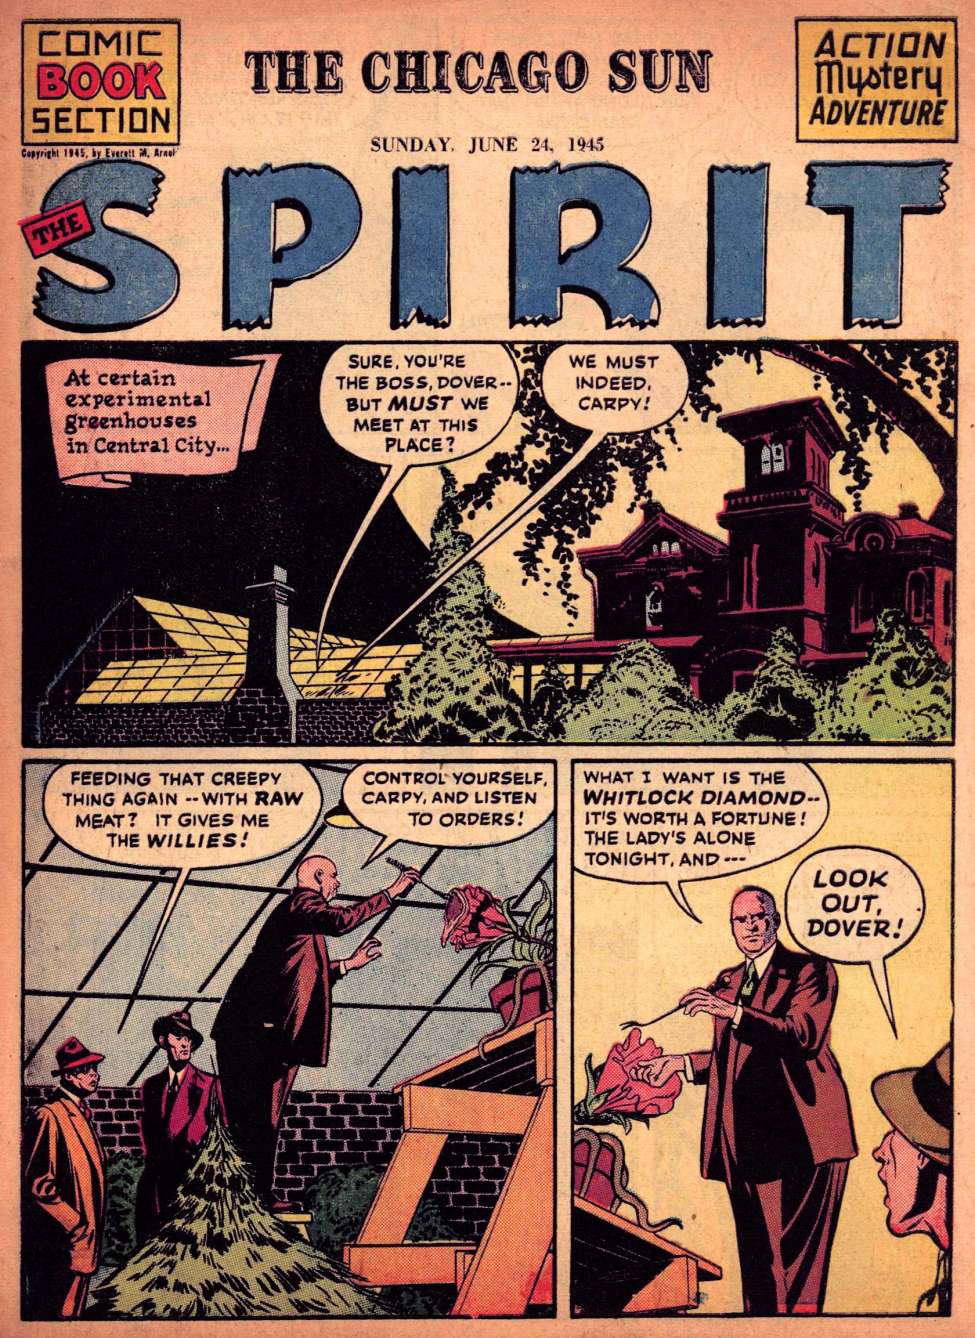 Book Cover For The Spirit (1945-06-24) - Chicago Sun